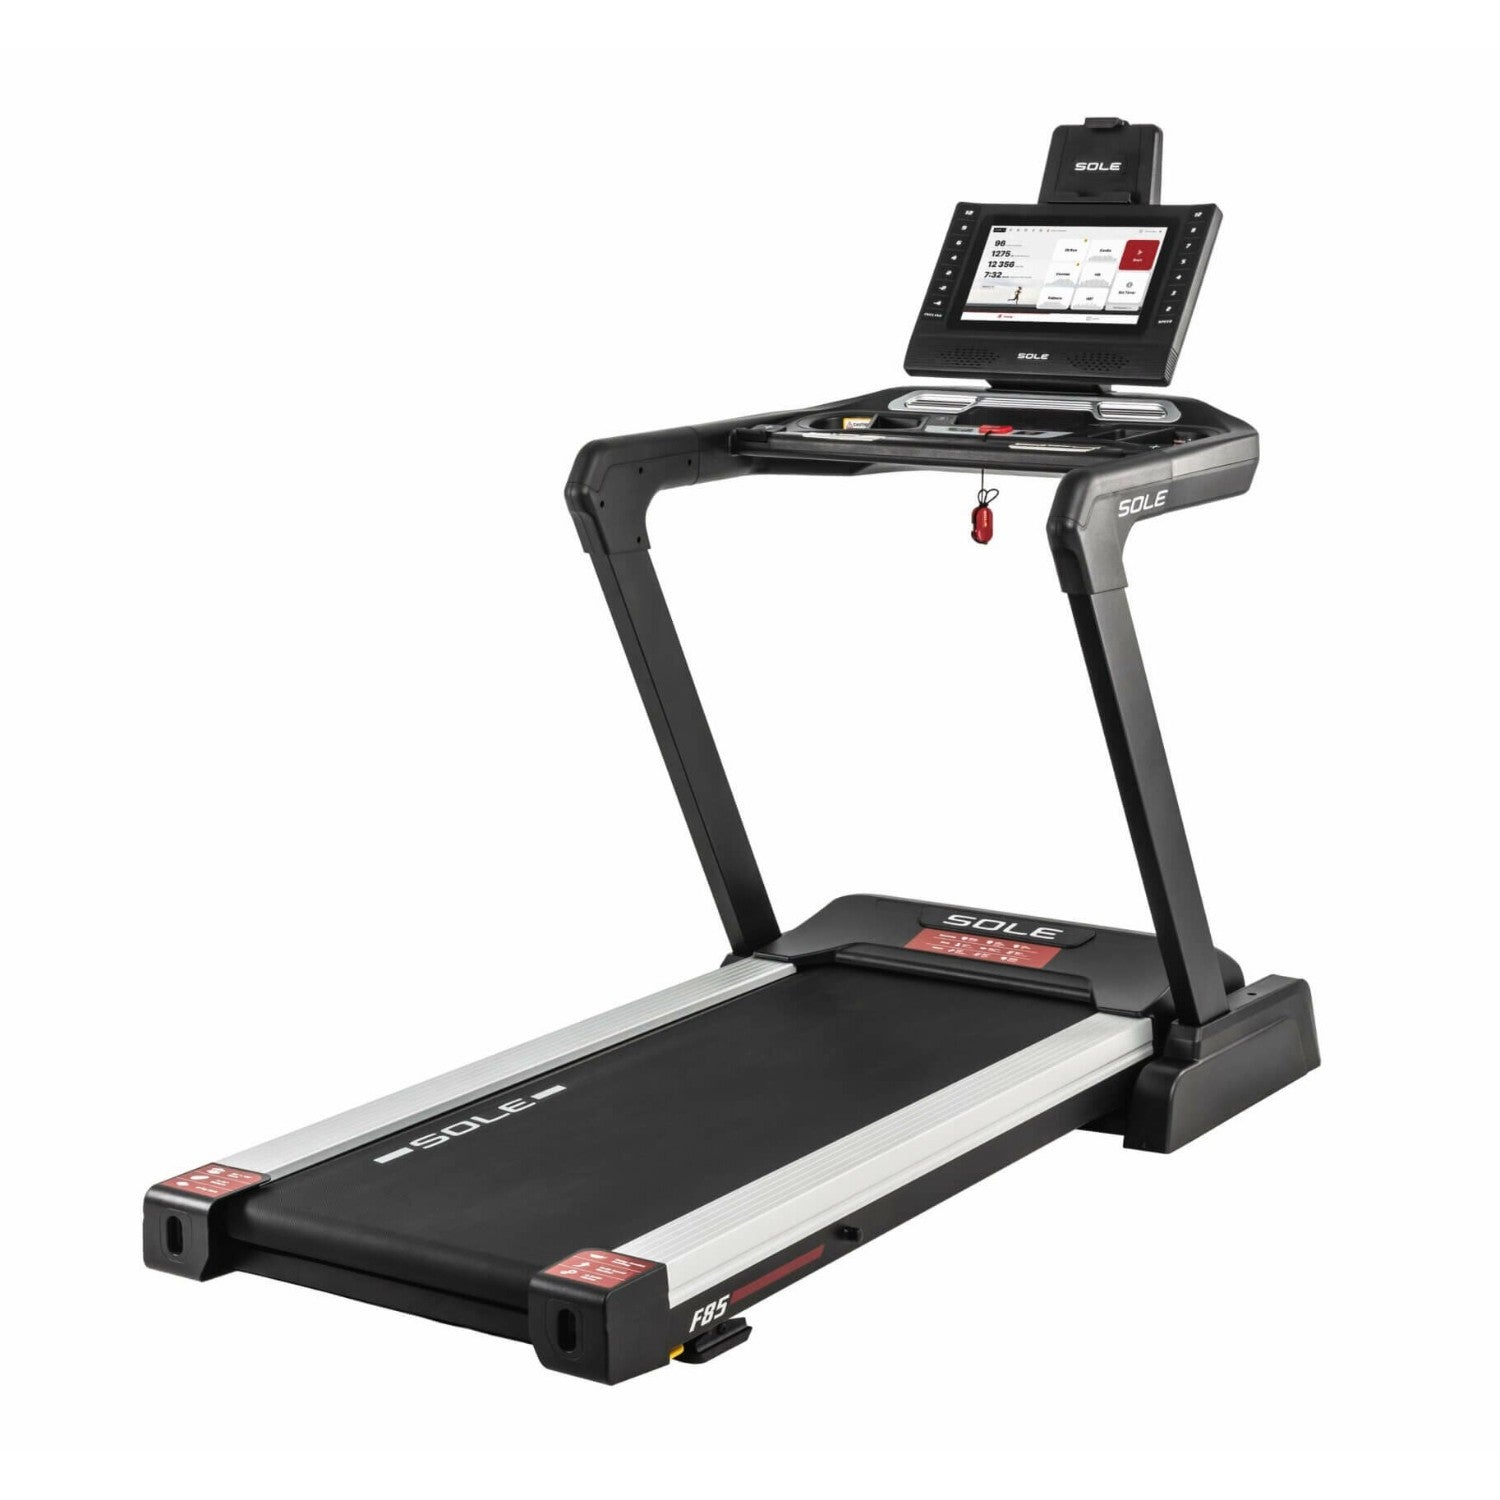 Sole F85 Treadmill Specifications